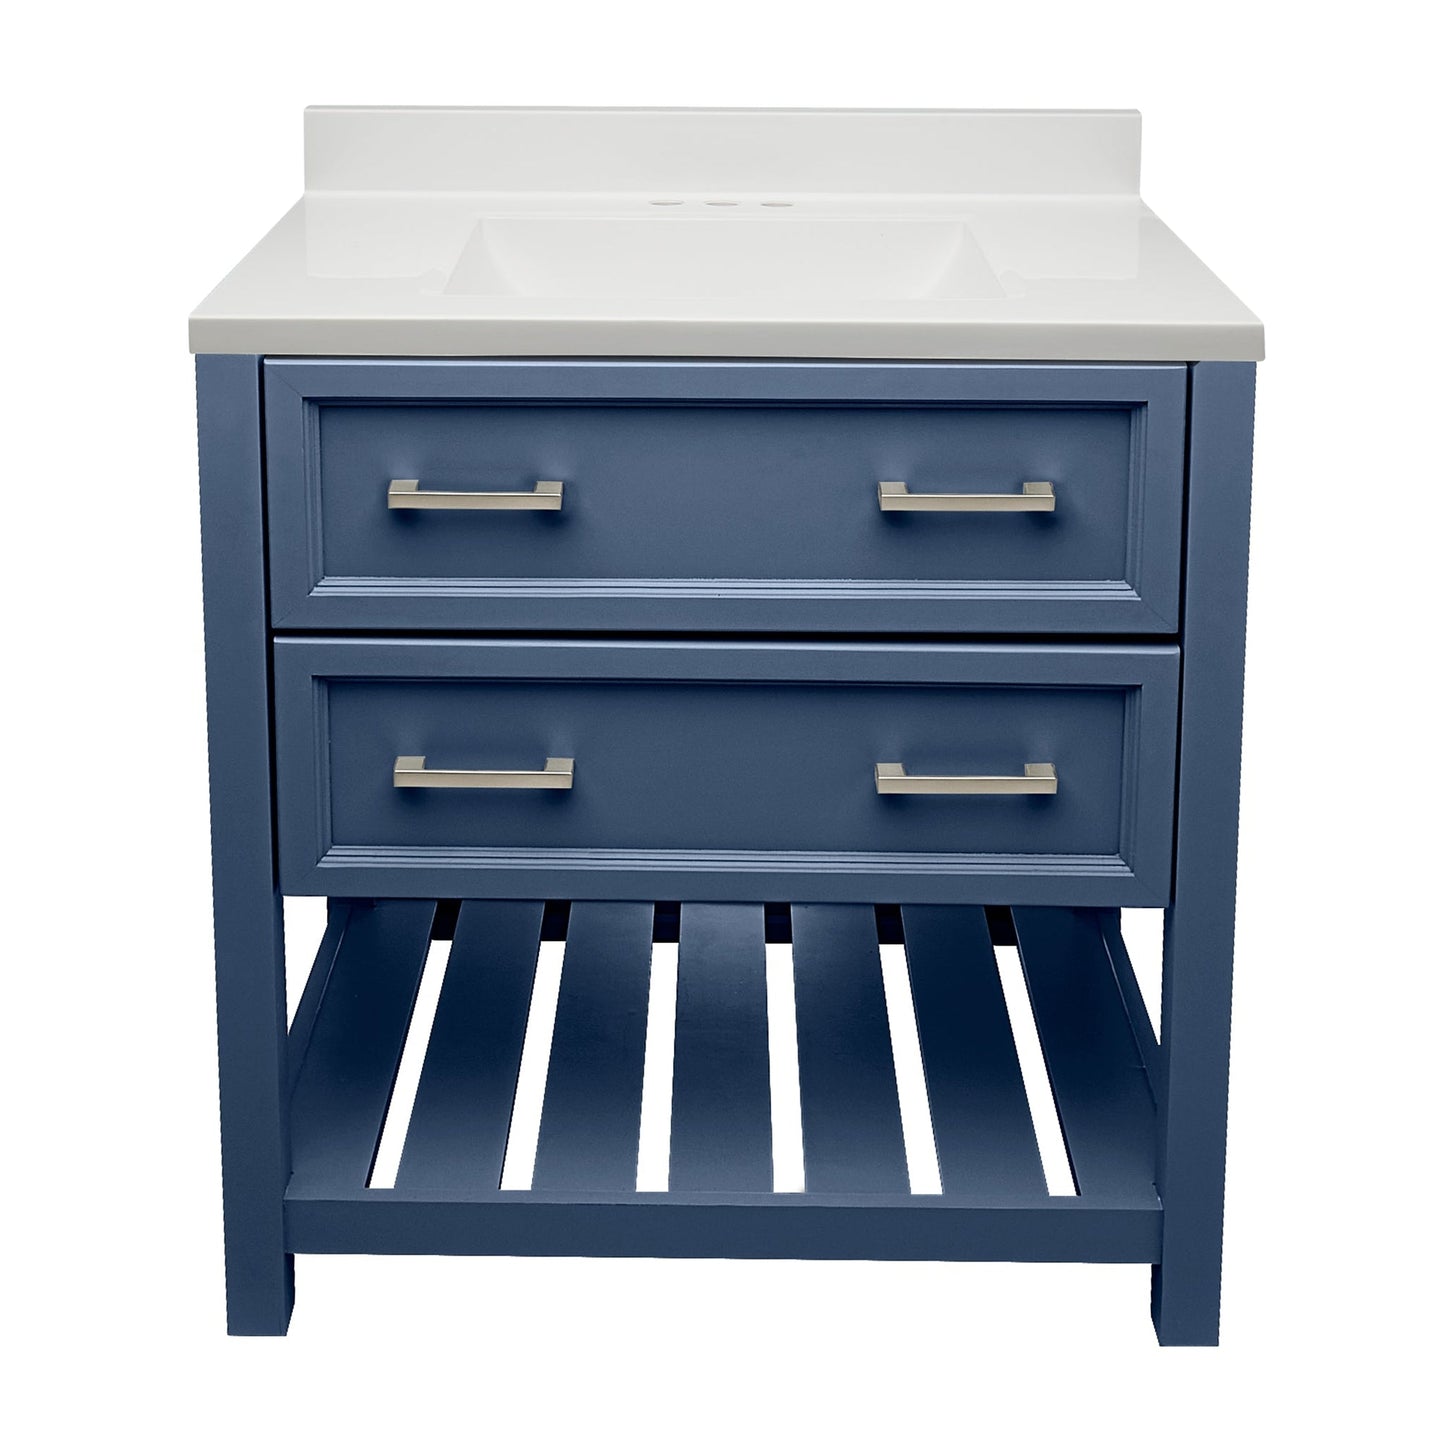 Ella's Bubbles Tremblant 31" Navy Blue Bathroom Vanity With White Cultured Marble Top With White Backsplash and Sink